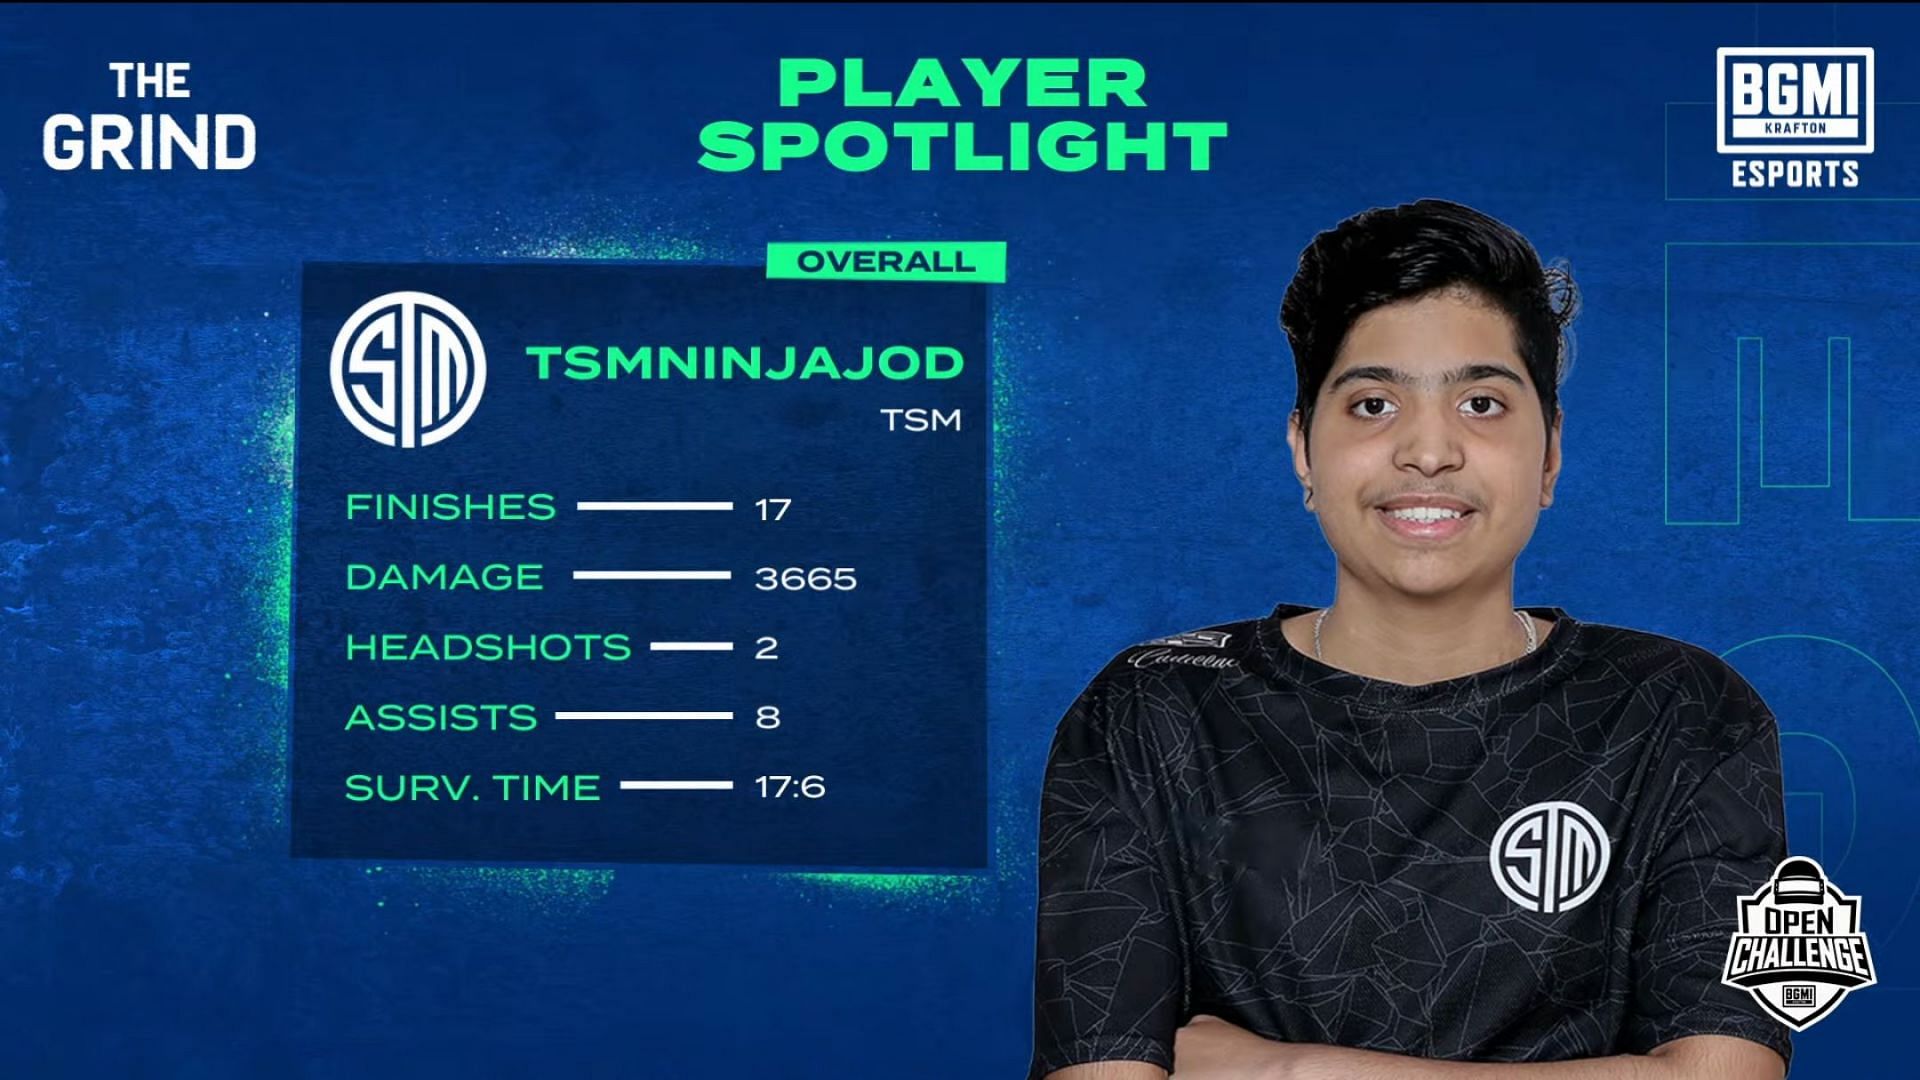 Ninjajod grabbed 17 finishes in his eight matches (Image via BGMI)